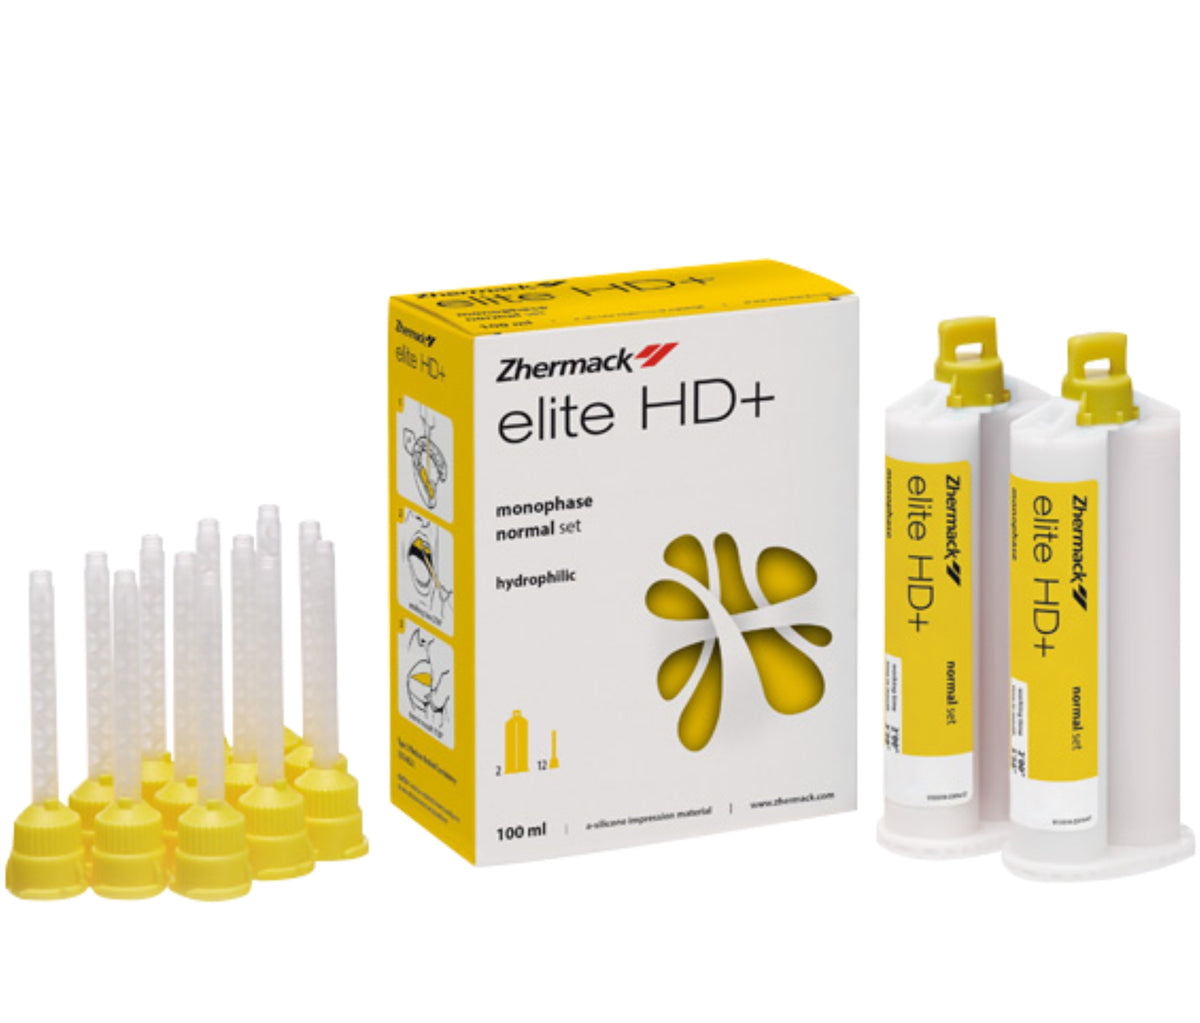 Zhermack ELITE HD+  MONOPHASE Normal Set 2x50 Ml Cartridges + 12 Small Yellow Mixing Tips